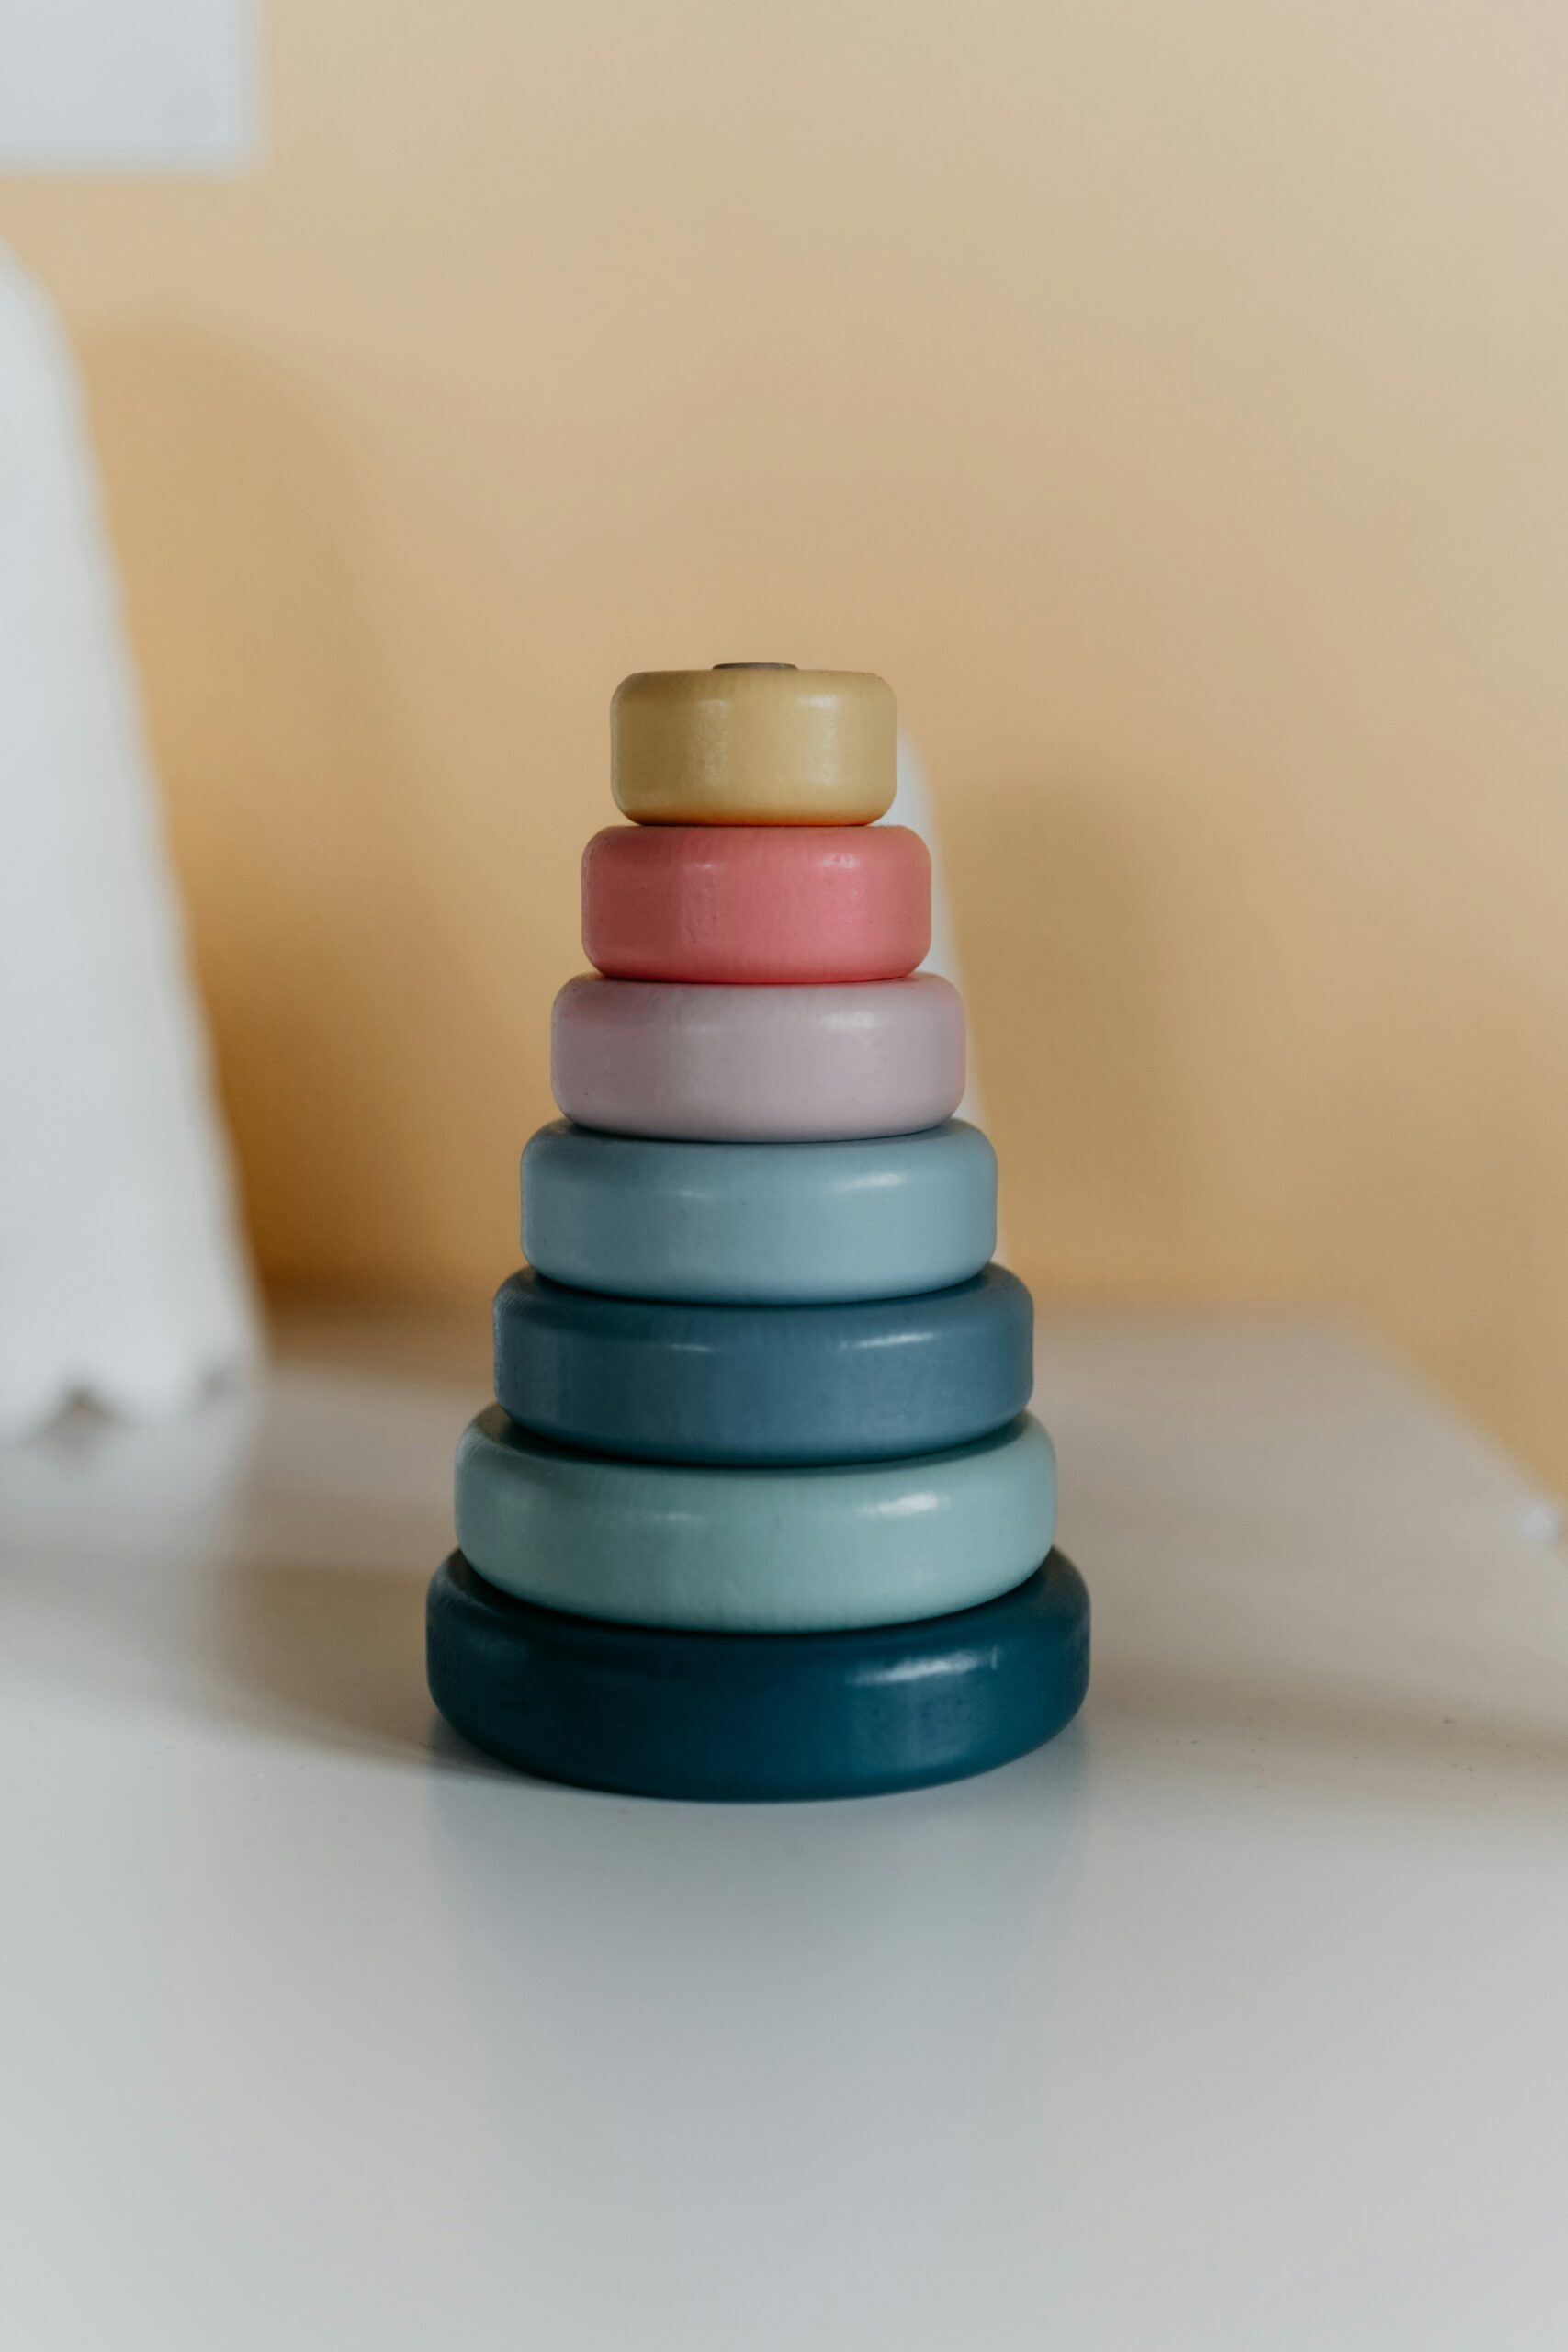 stacking rings toy sitting on counter